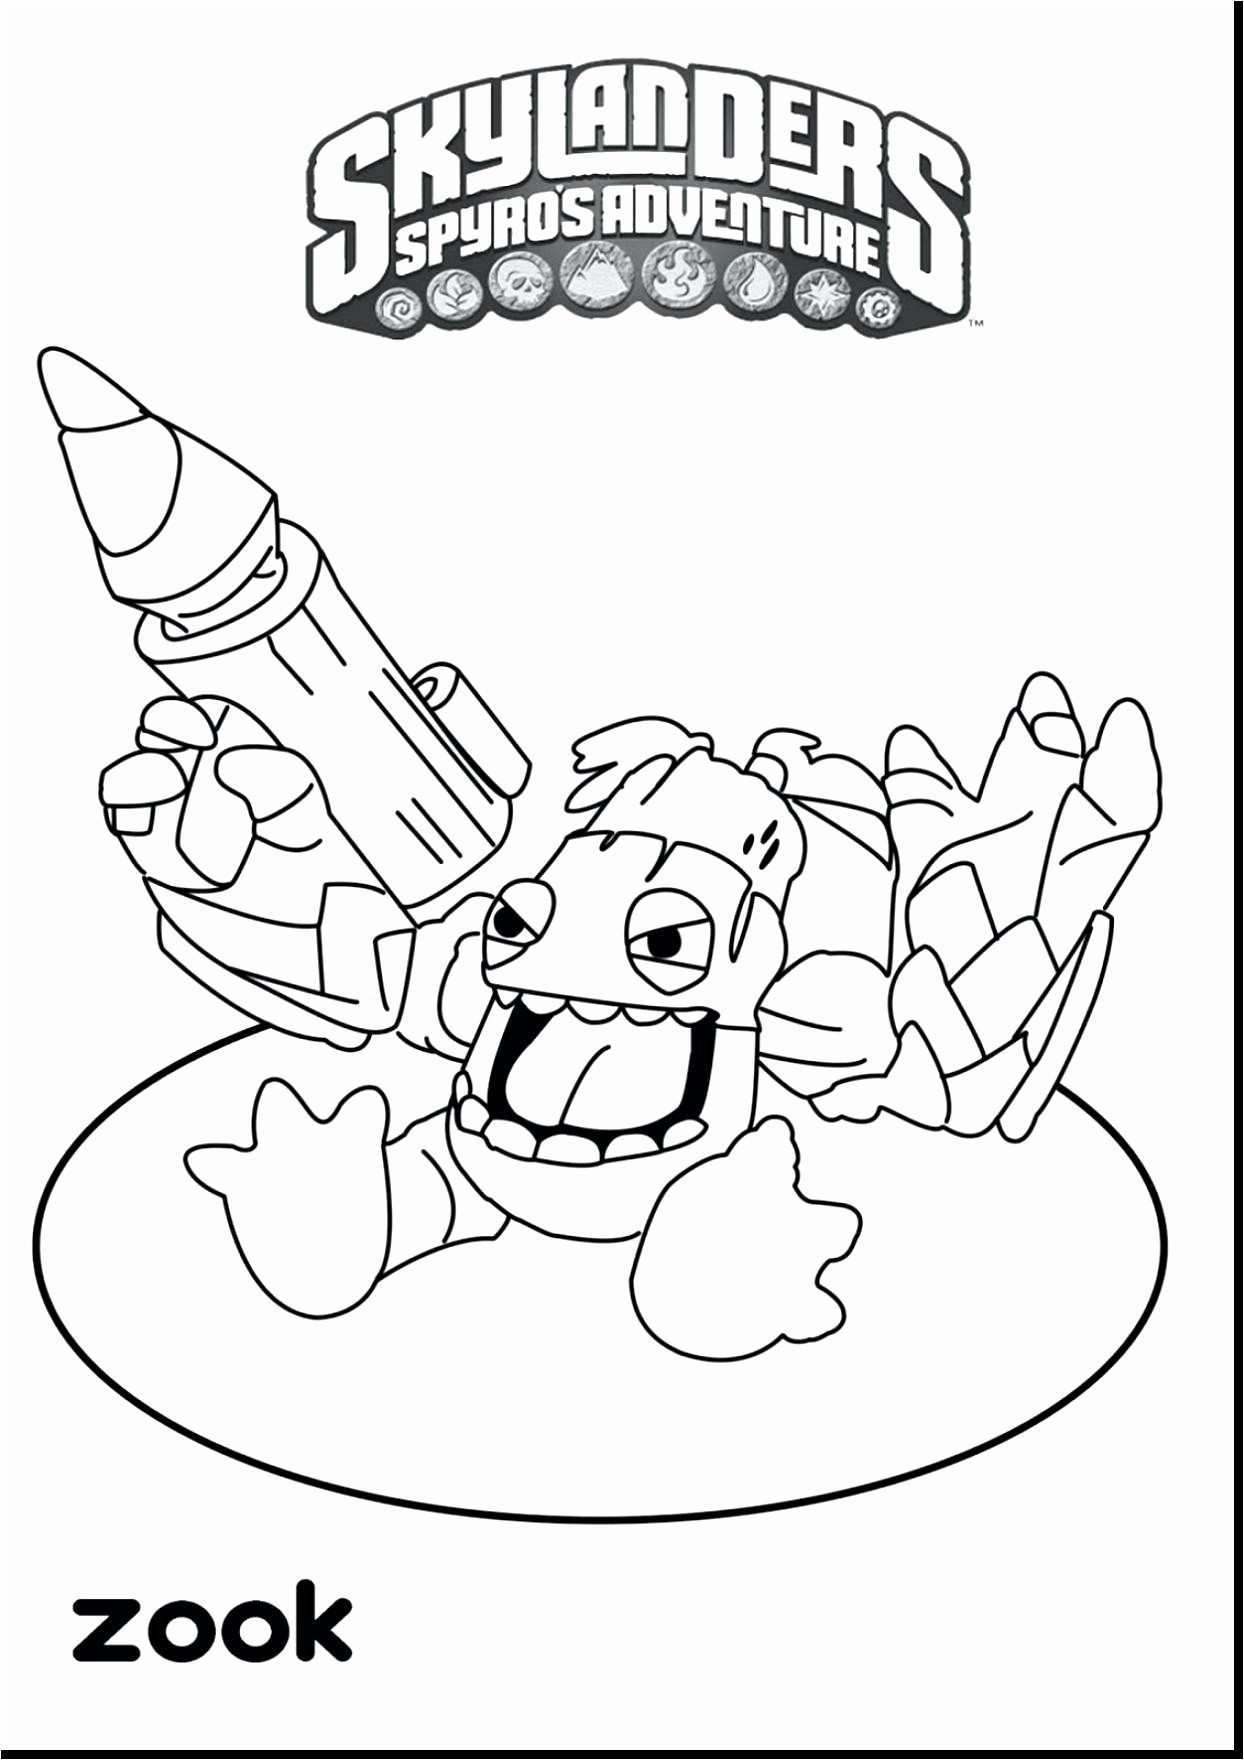 Giant Coloring Pages For Adults Trolls Coloring Pages New Luxury Crayola Giant Coloring Pages Trolls